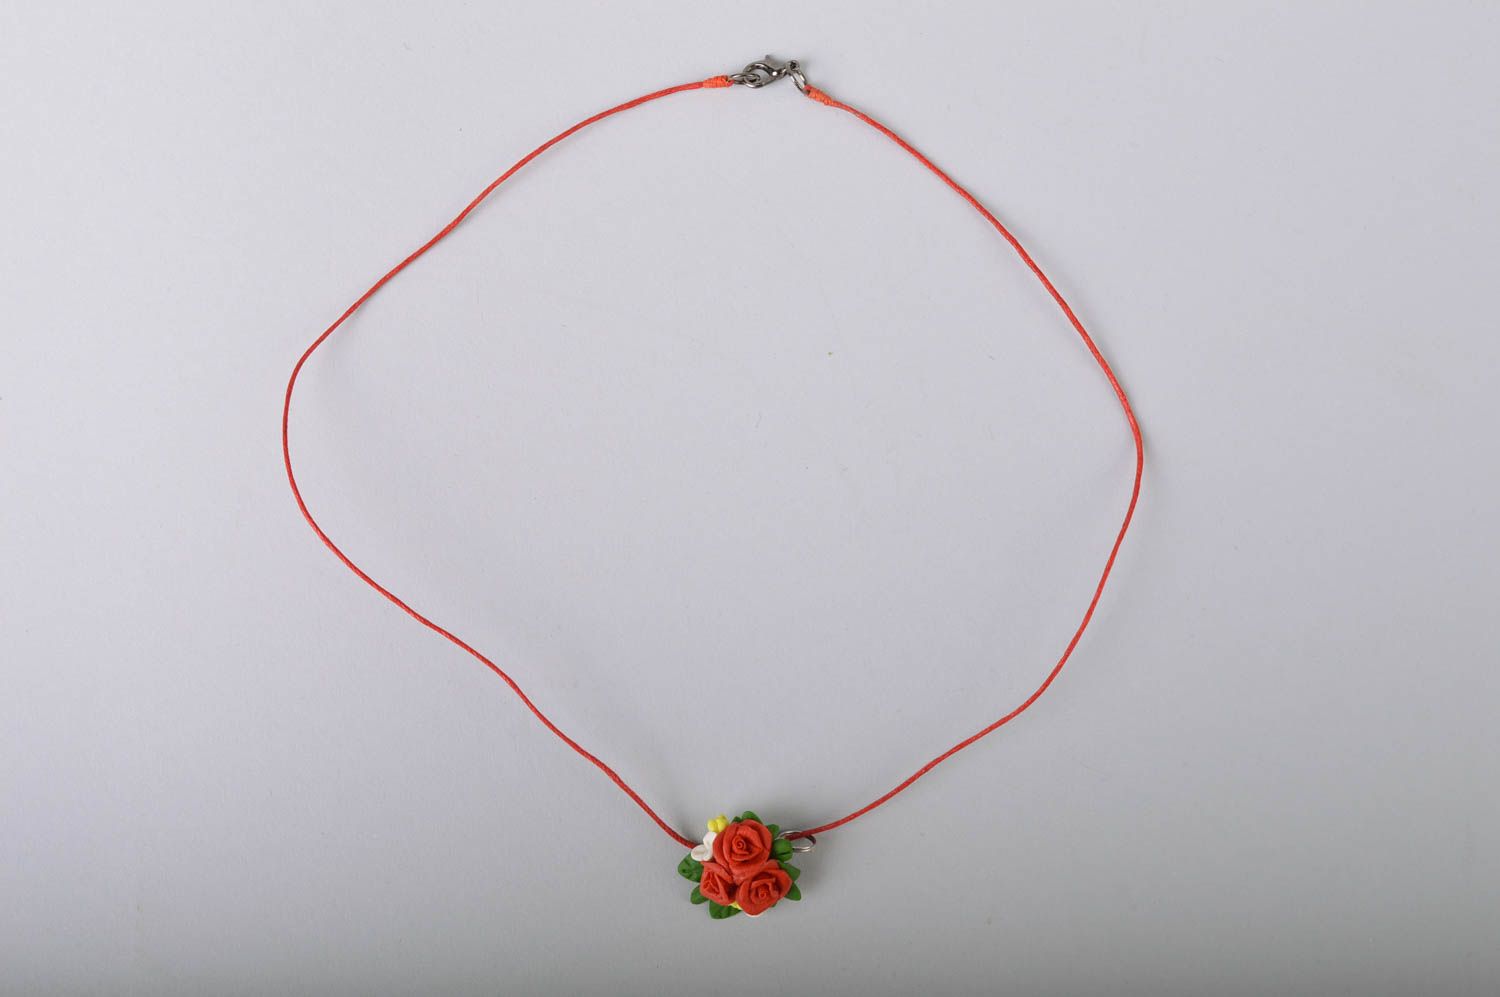 Handmade small floral cold porcelain pendant necklace red roses on cord photo 2